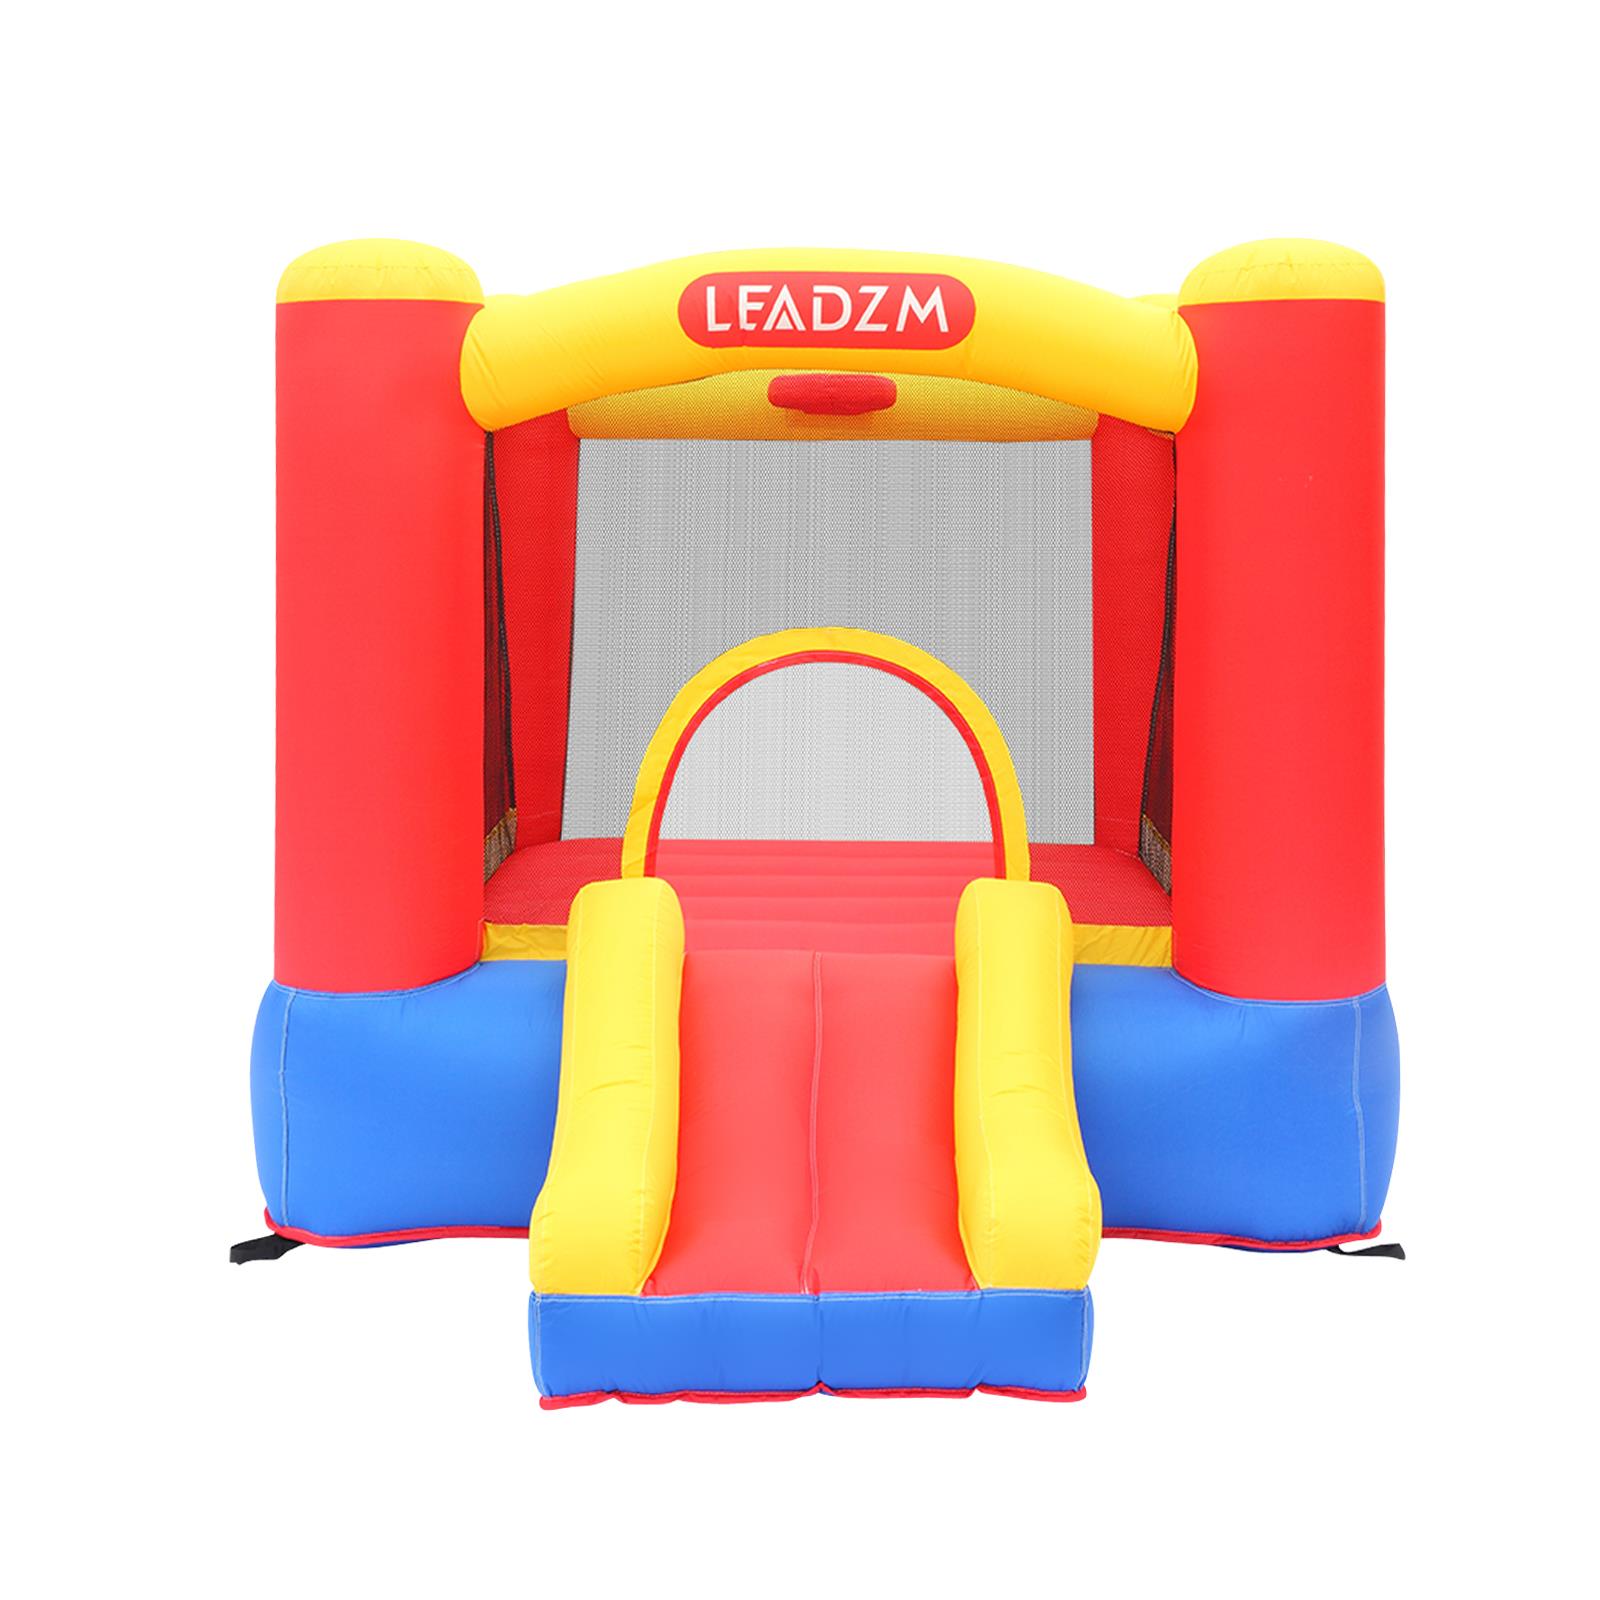 Ktaxon Toddler Inflatable Bounce House, Jumper Slide Castle with 350W Air Blower - image 1 of 7